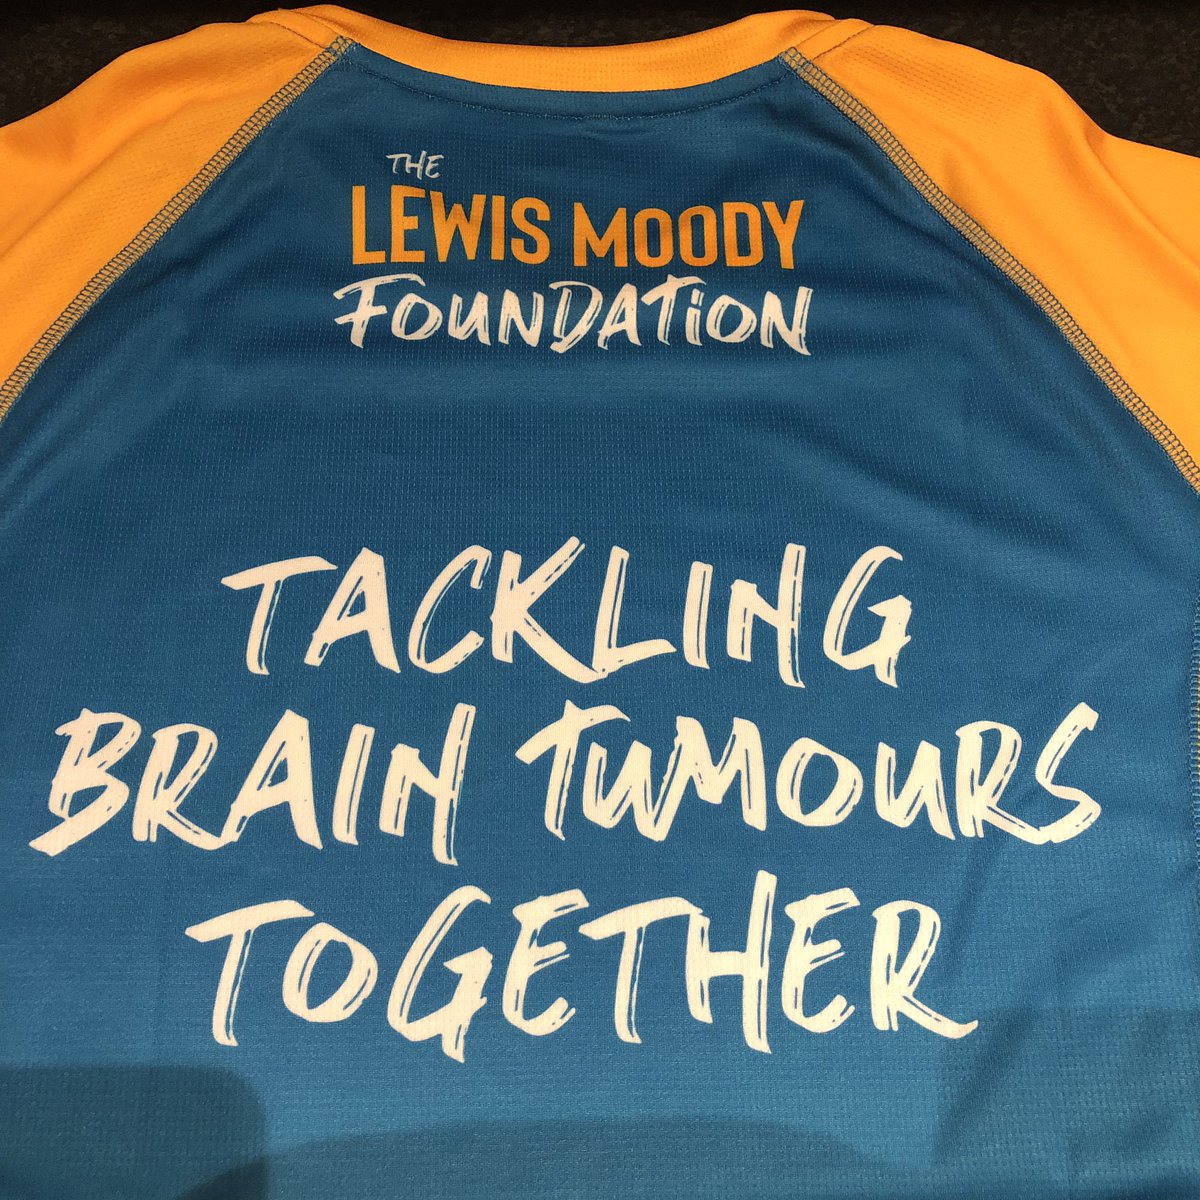 Yikesssss!!! My top has arrived ready for the #BathSportive #TeamBathSportive @LewisMoodyFdn @BrainTumourOrg - excited/anxious #TacklingBrainTumoursTogether